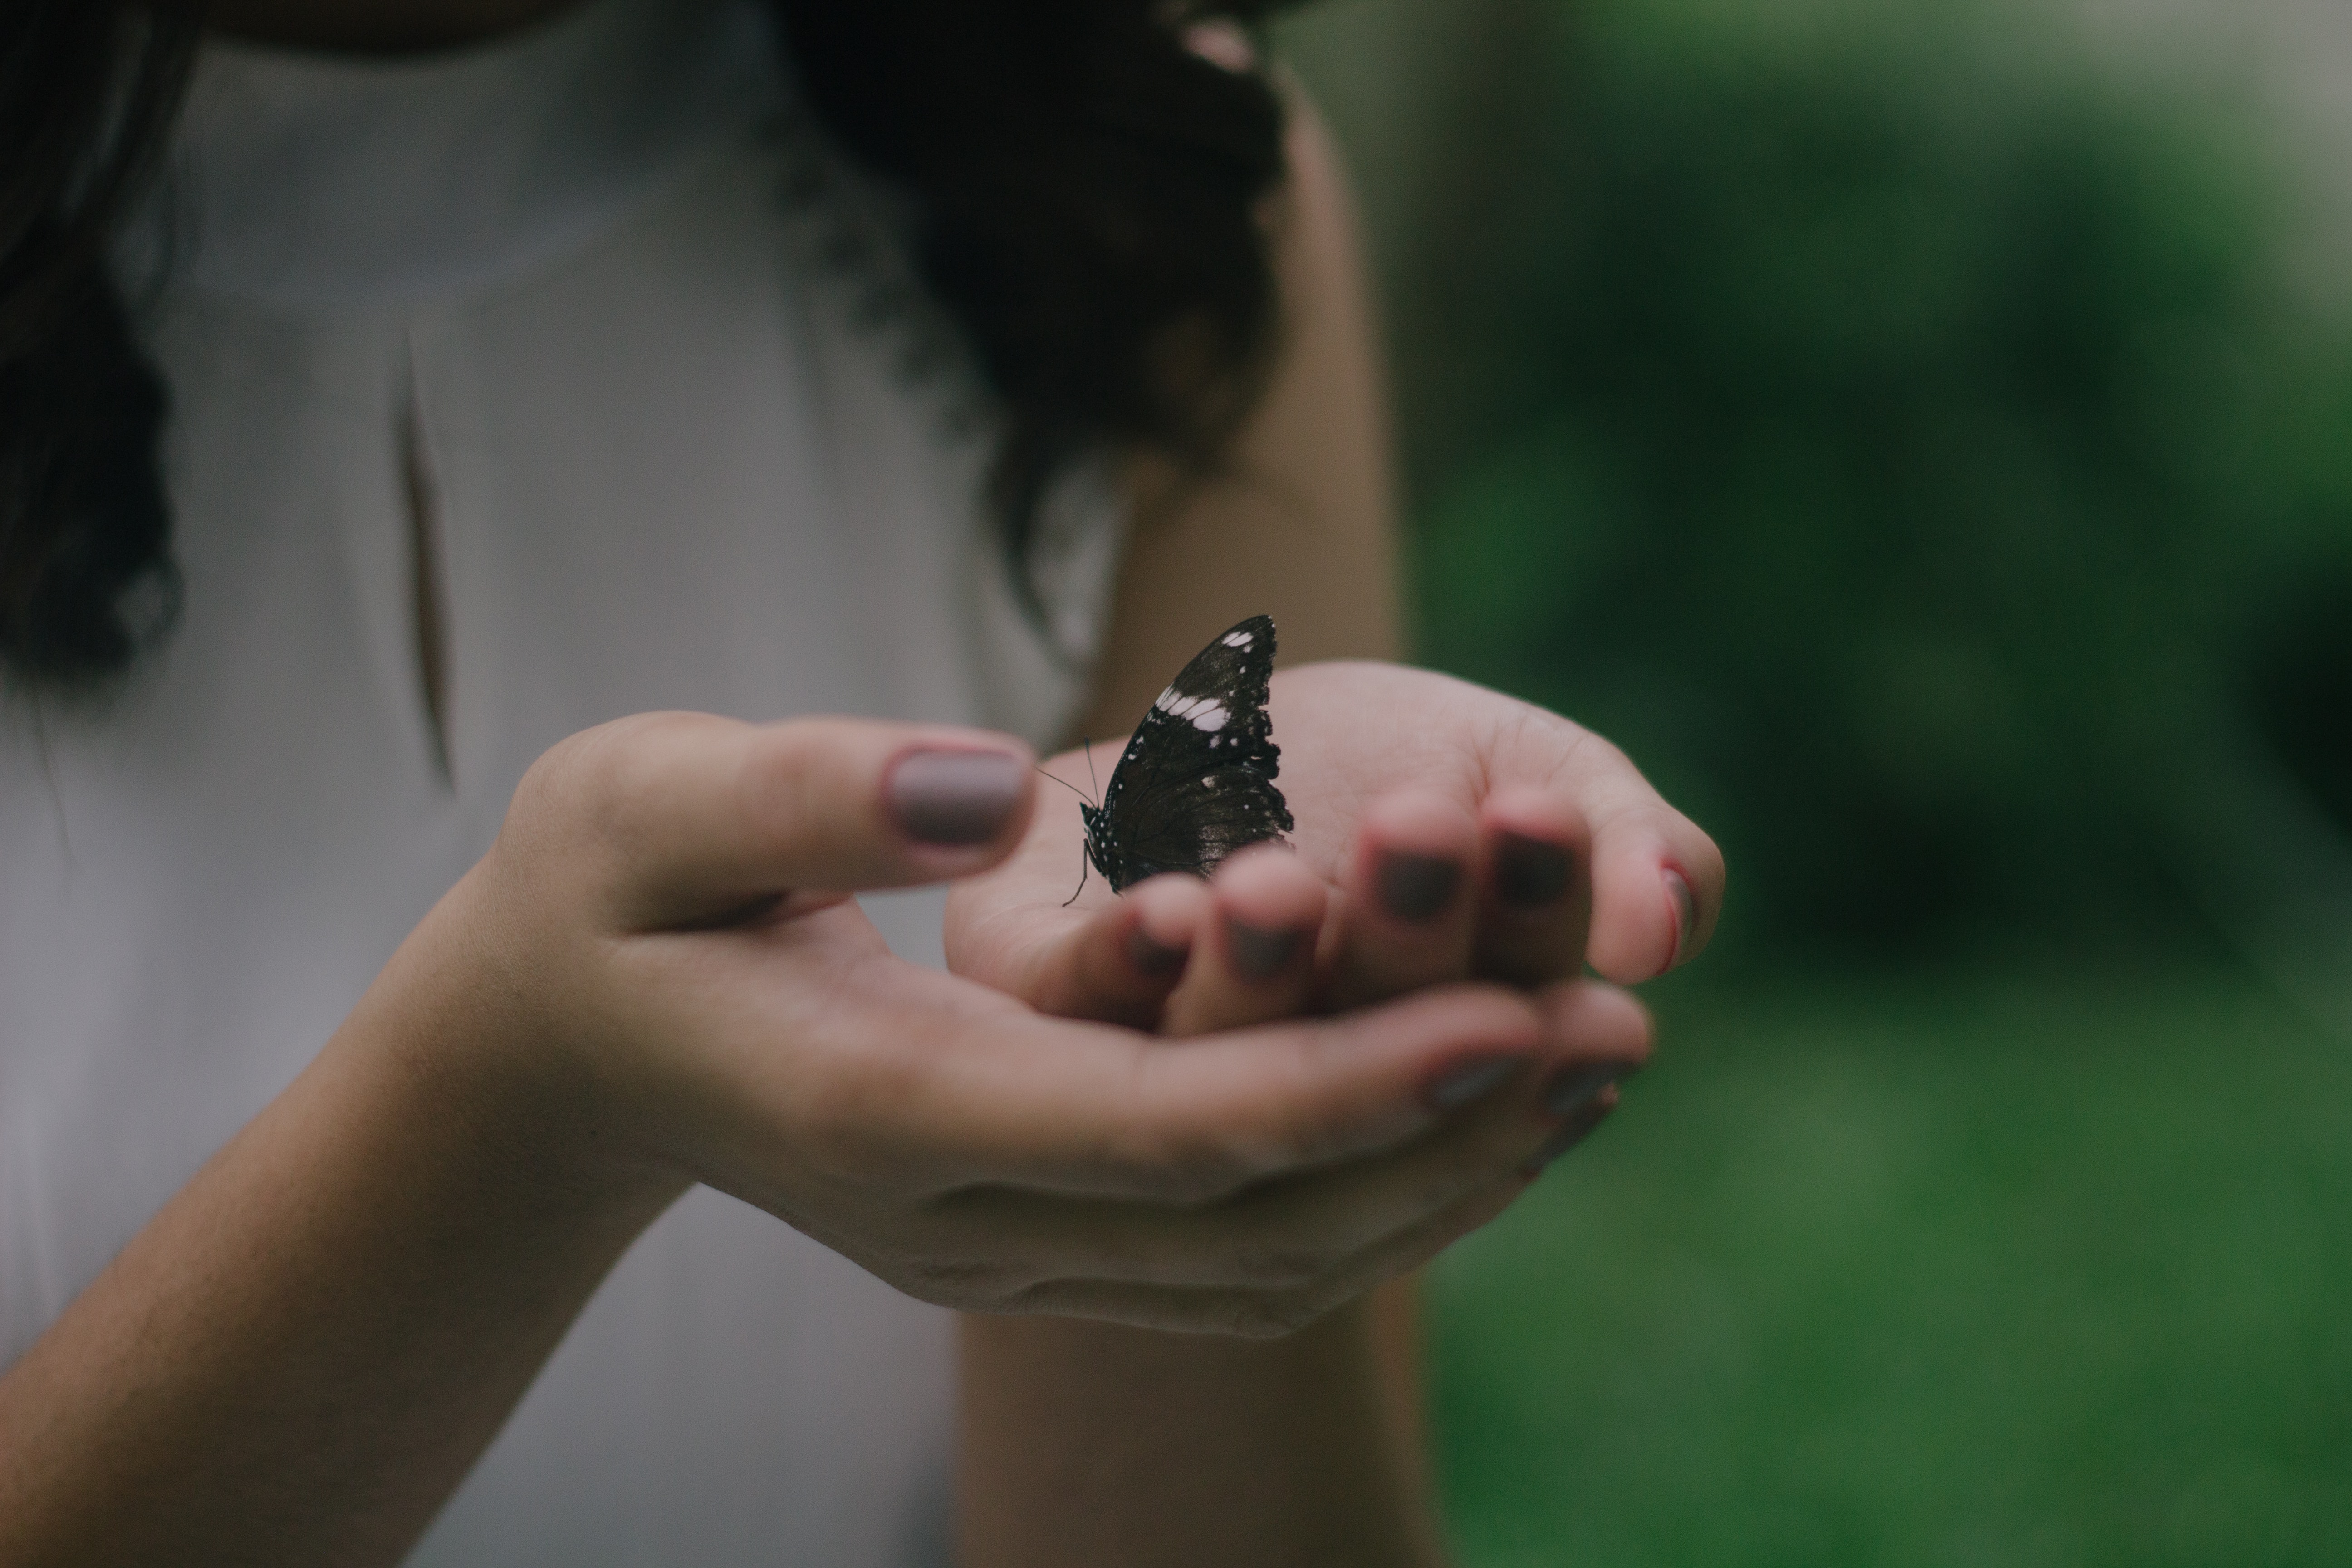 A woman holding a butterfly. | Source: Unsplash